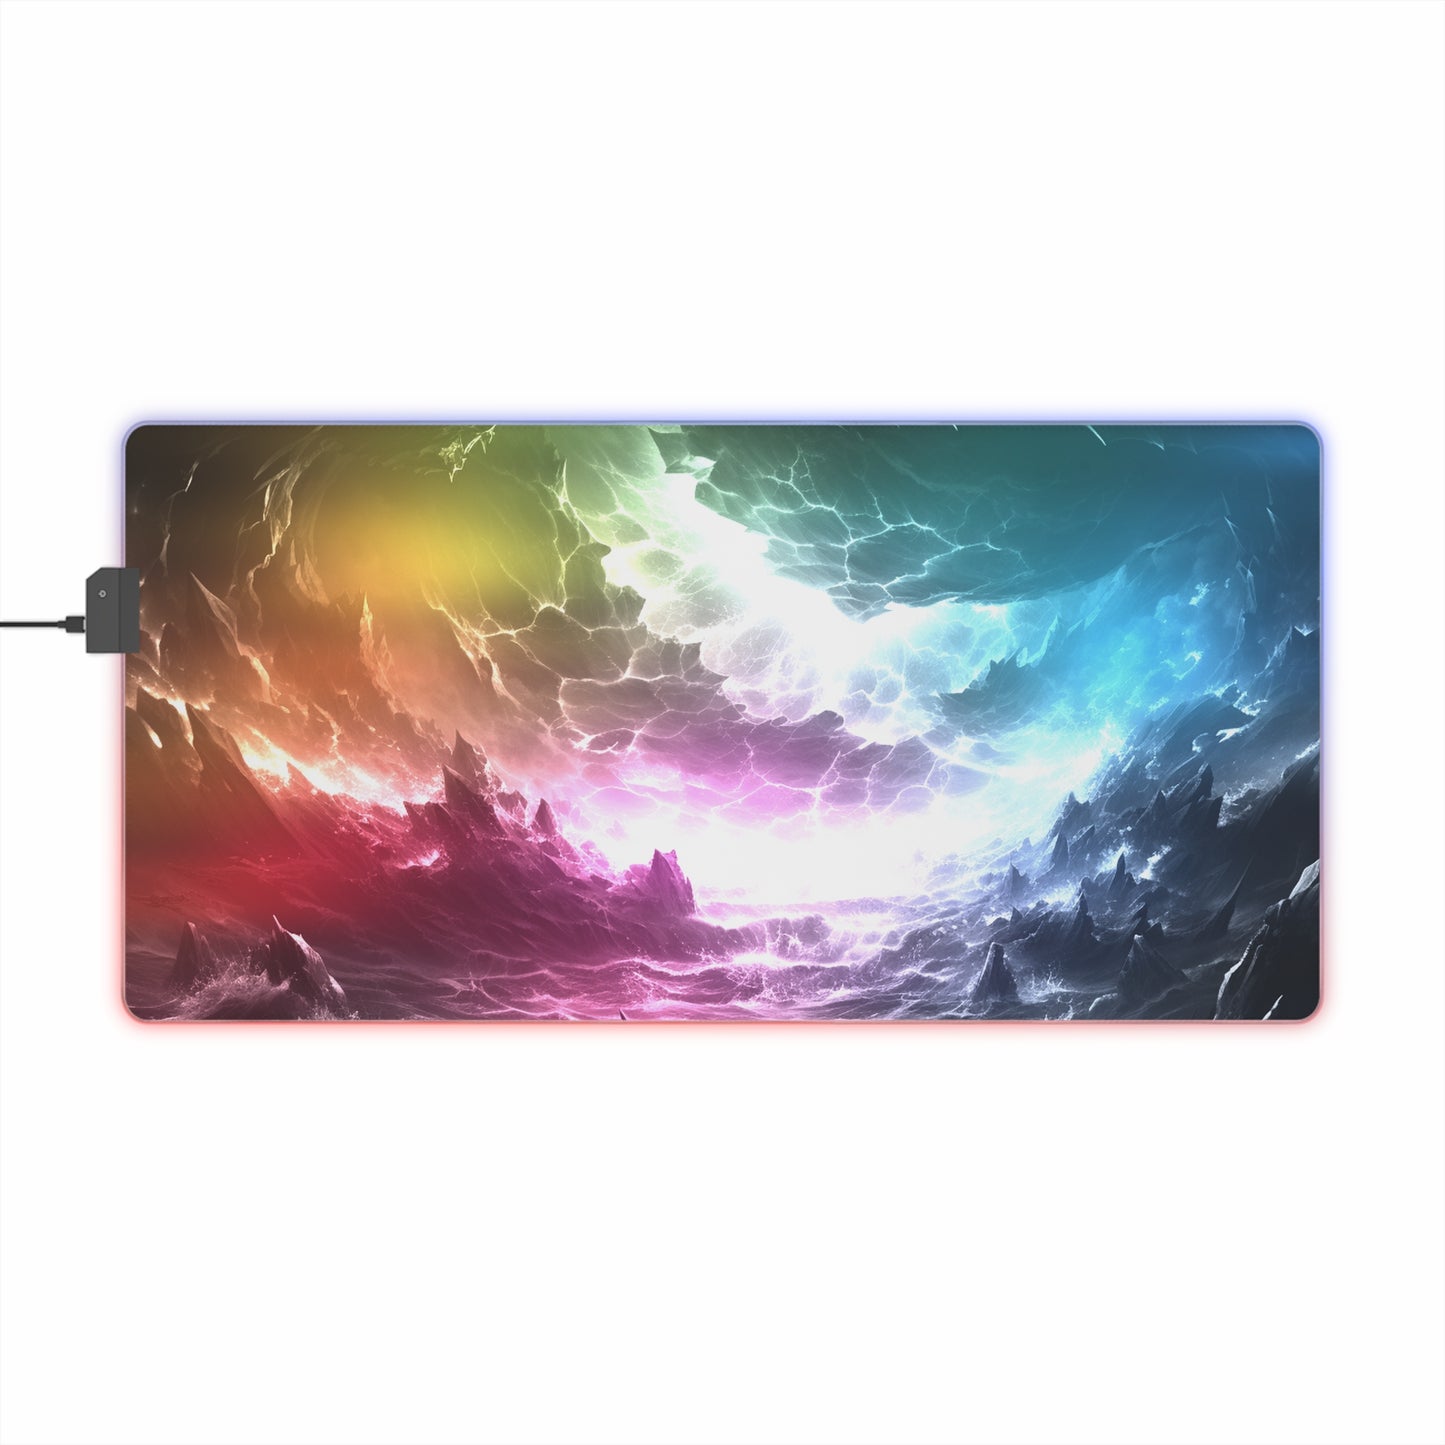 Stormy Ocean LED Gaming Mouse Pad - Neduz Designs Landscape Collection